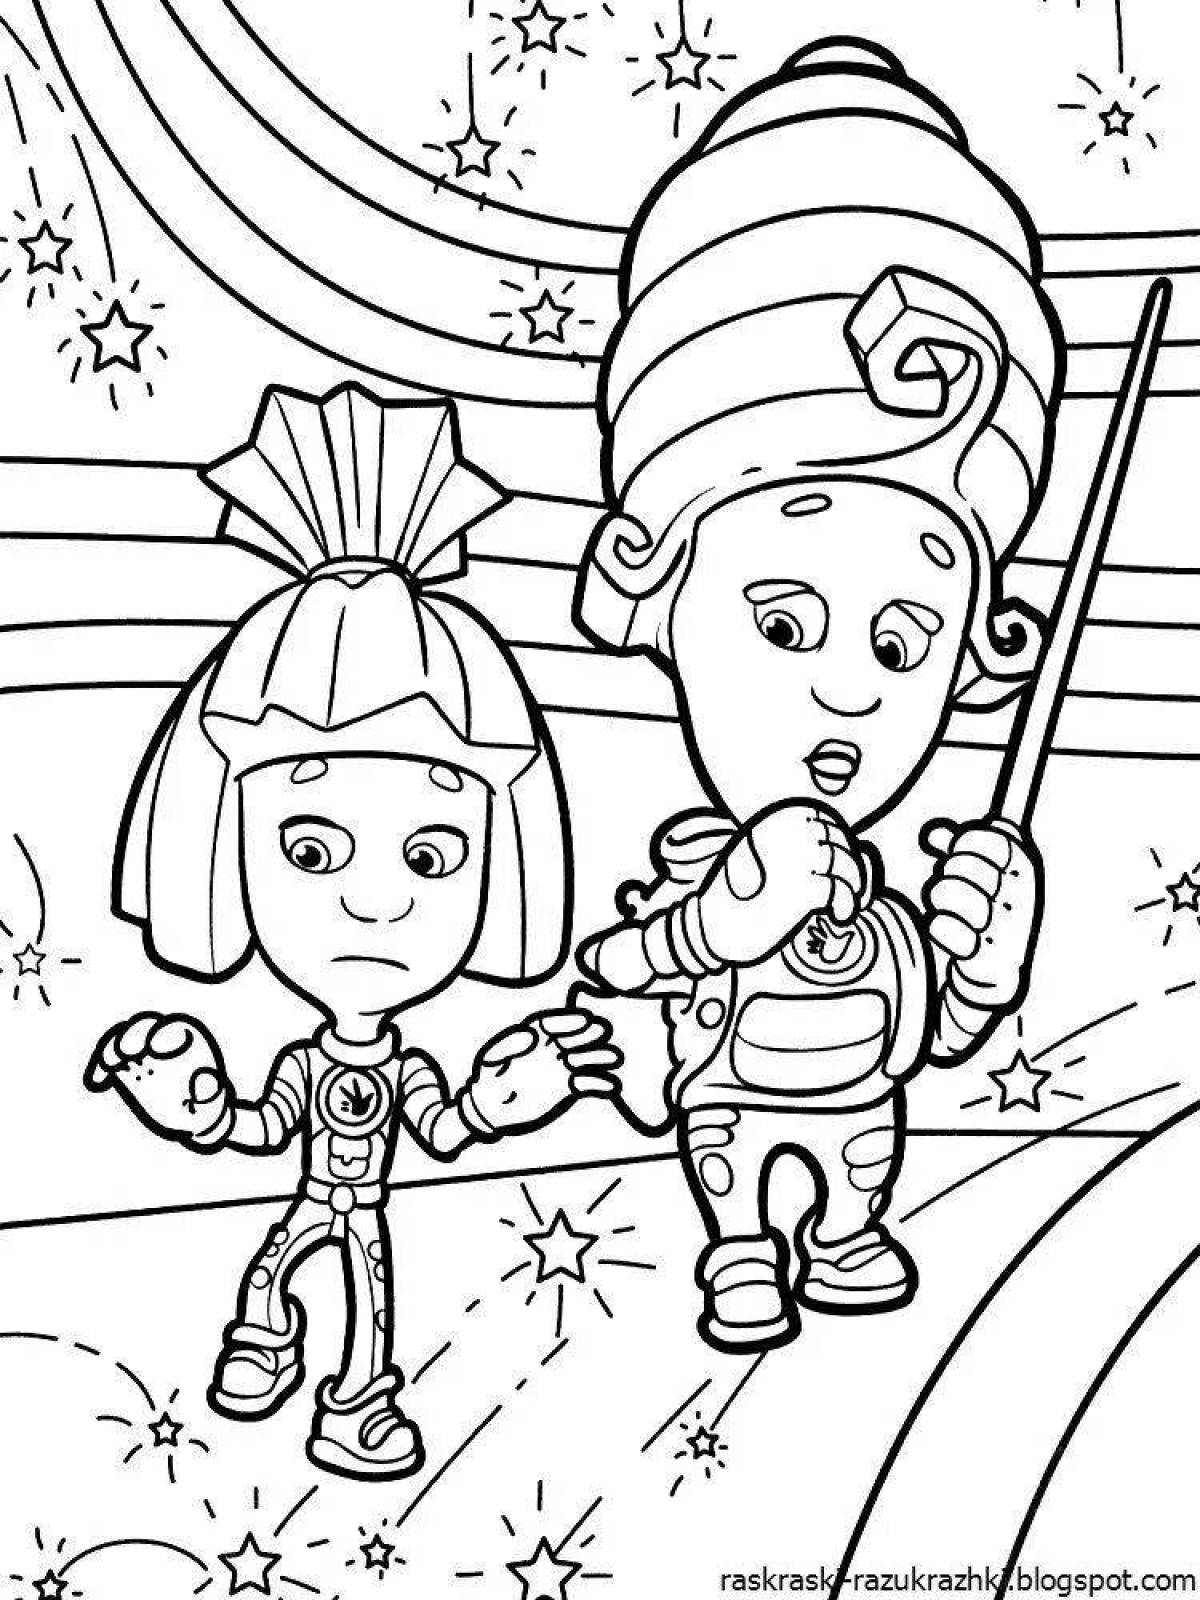 Coloring book for children 6-7 years old from cartoons